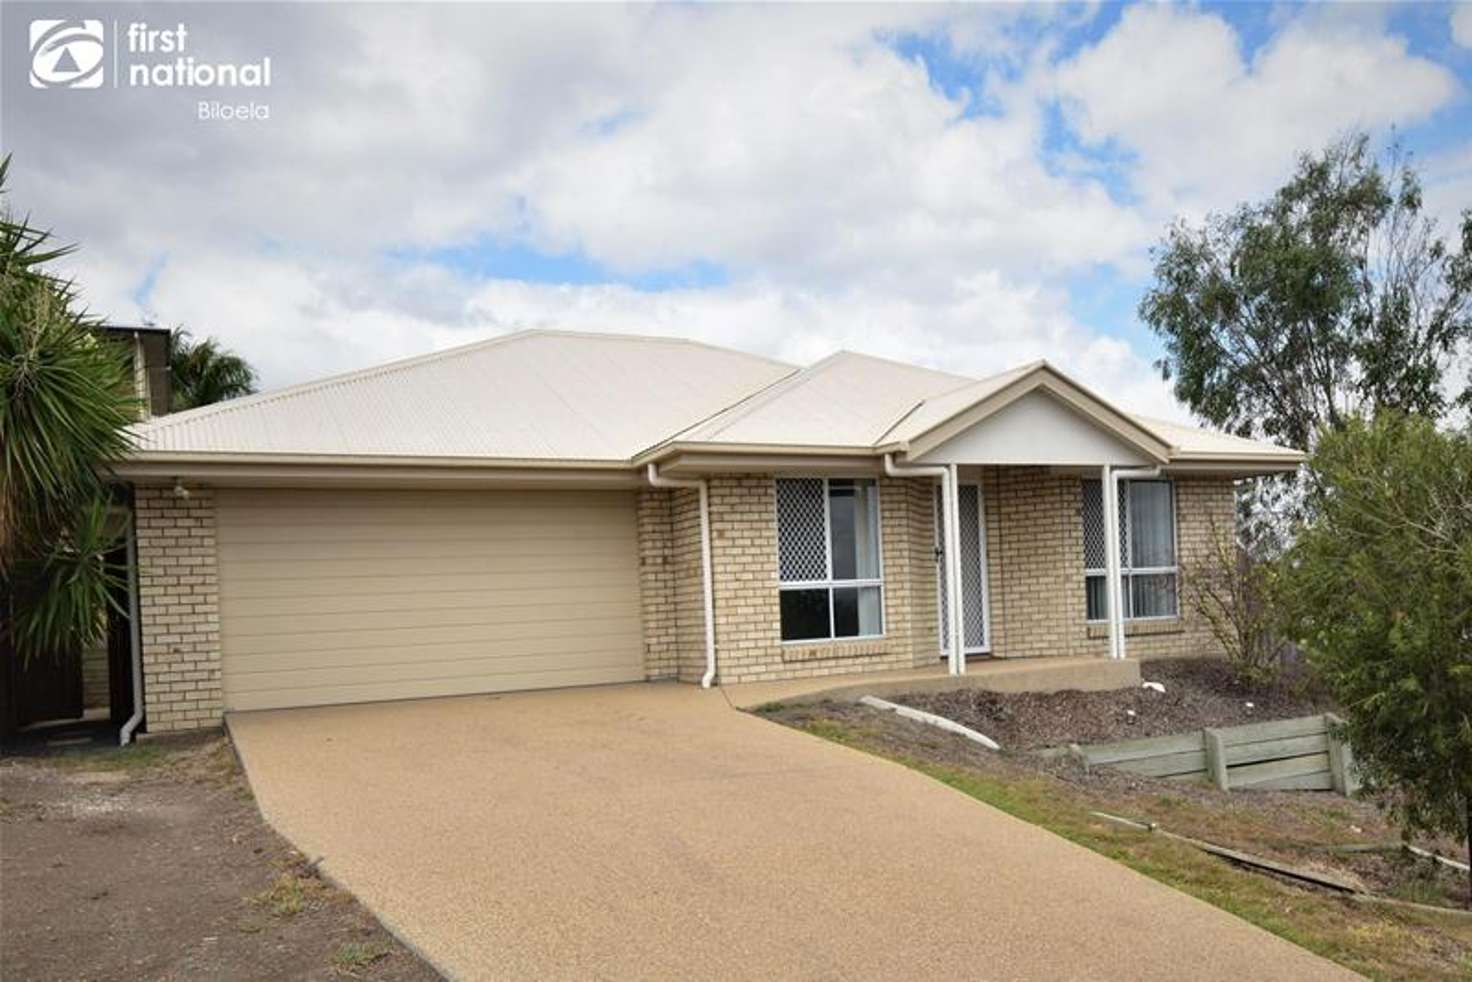 Main view of Homely house listing, 24 Panorama Drive, Biloela QLD 4715